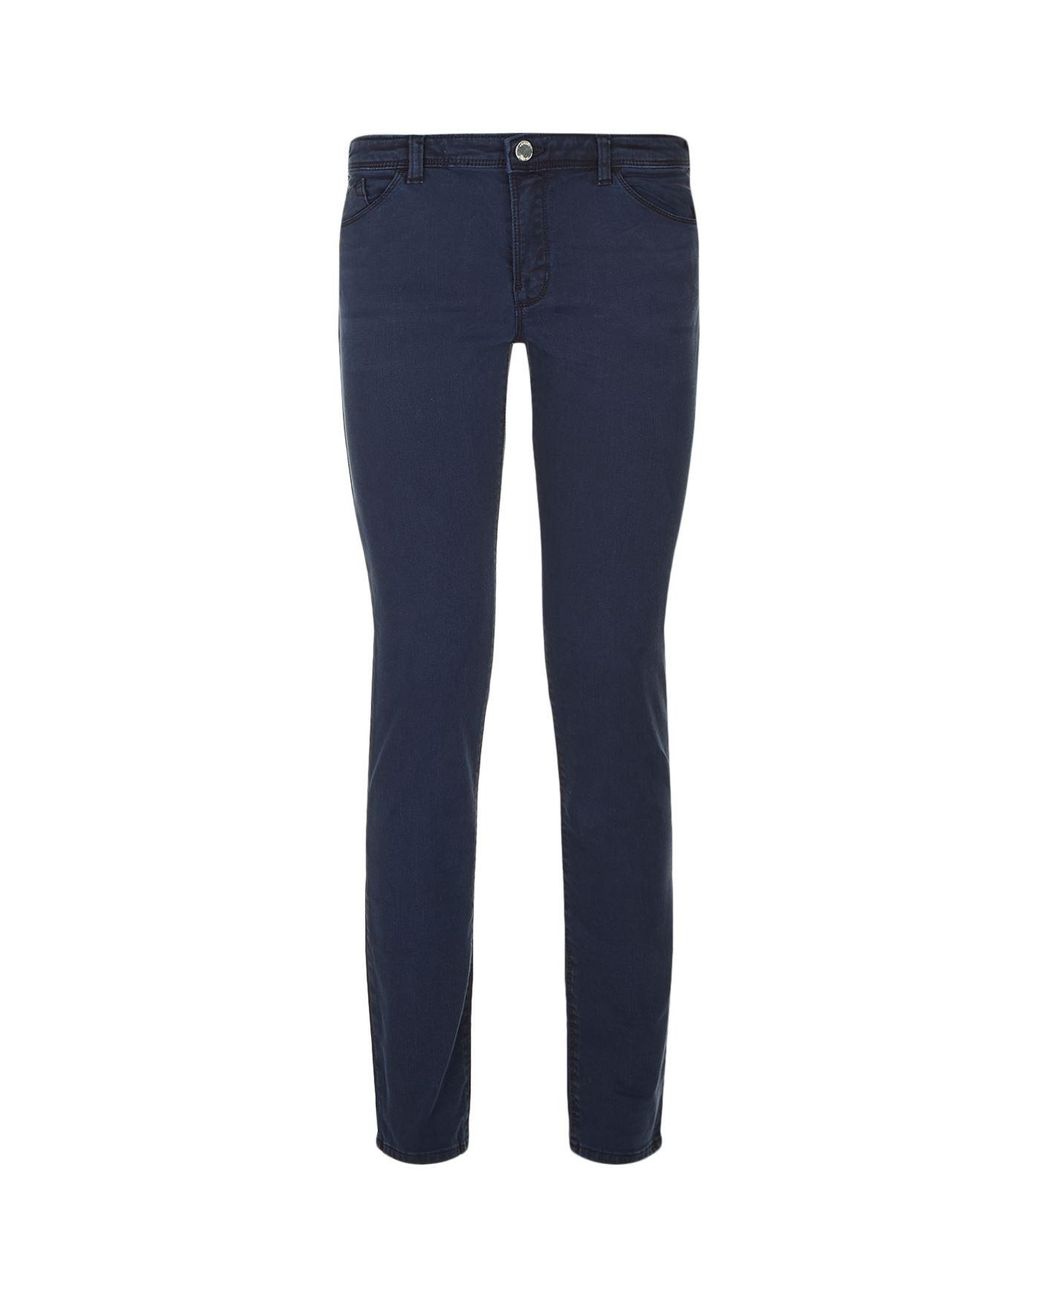 Armani Jeans J28 Orchid Skinny Jeans in Blue | Lyst UK